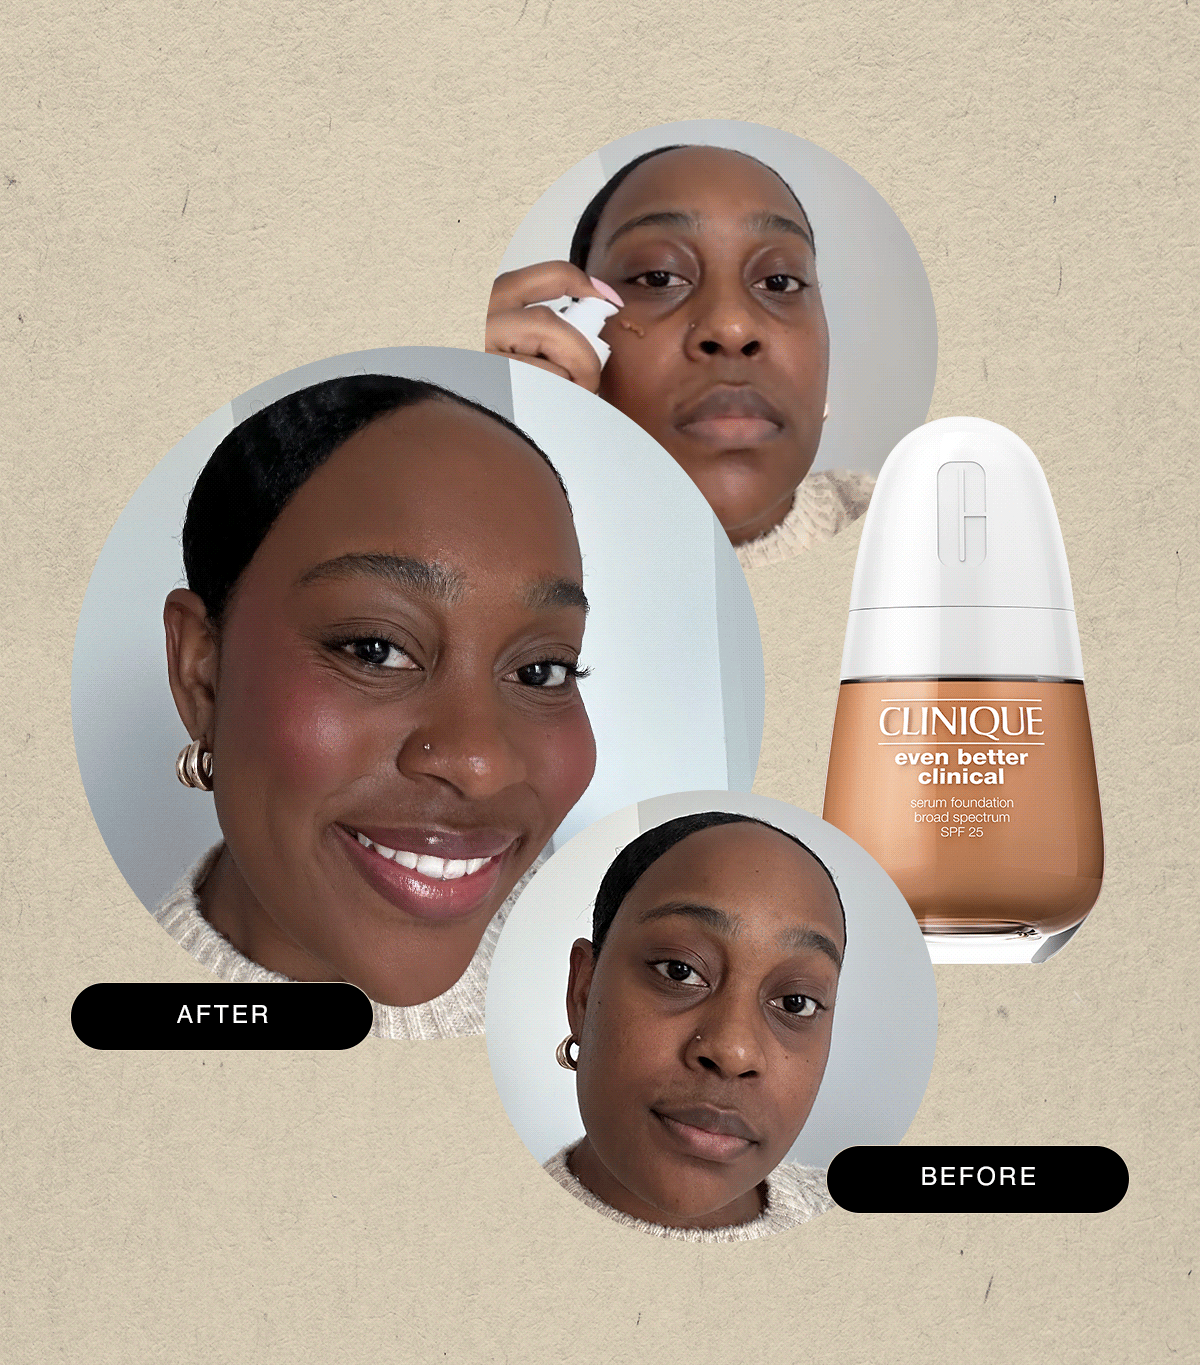 clinique-even-better-clinical-serum-foundation-review-305375-1675877094595-main